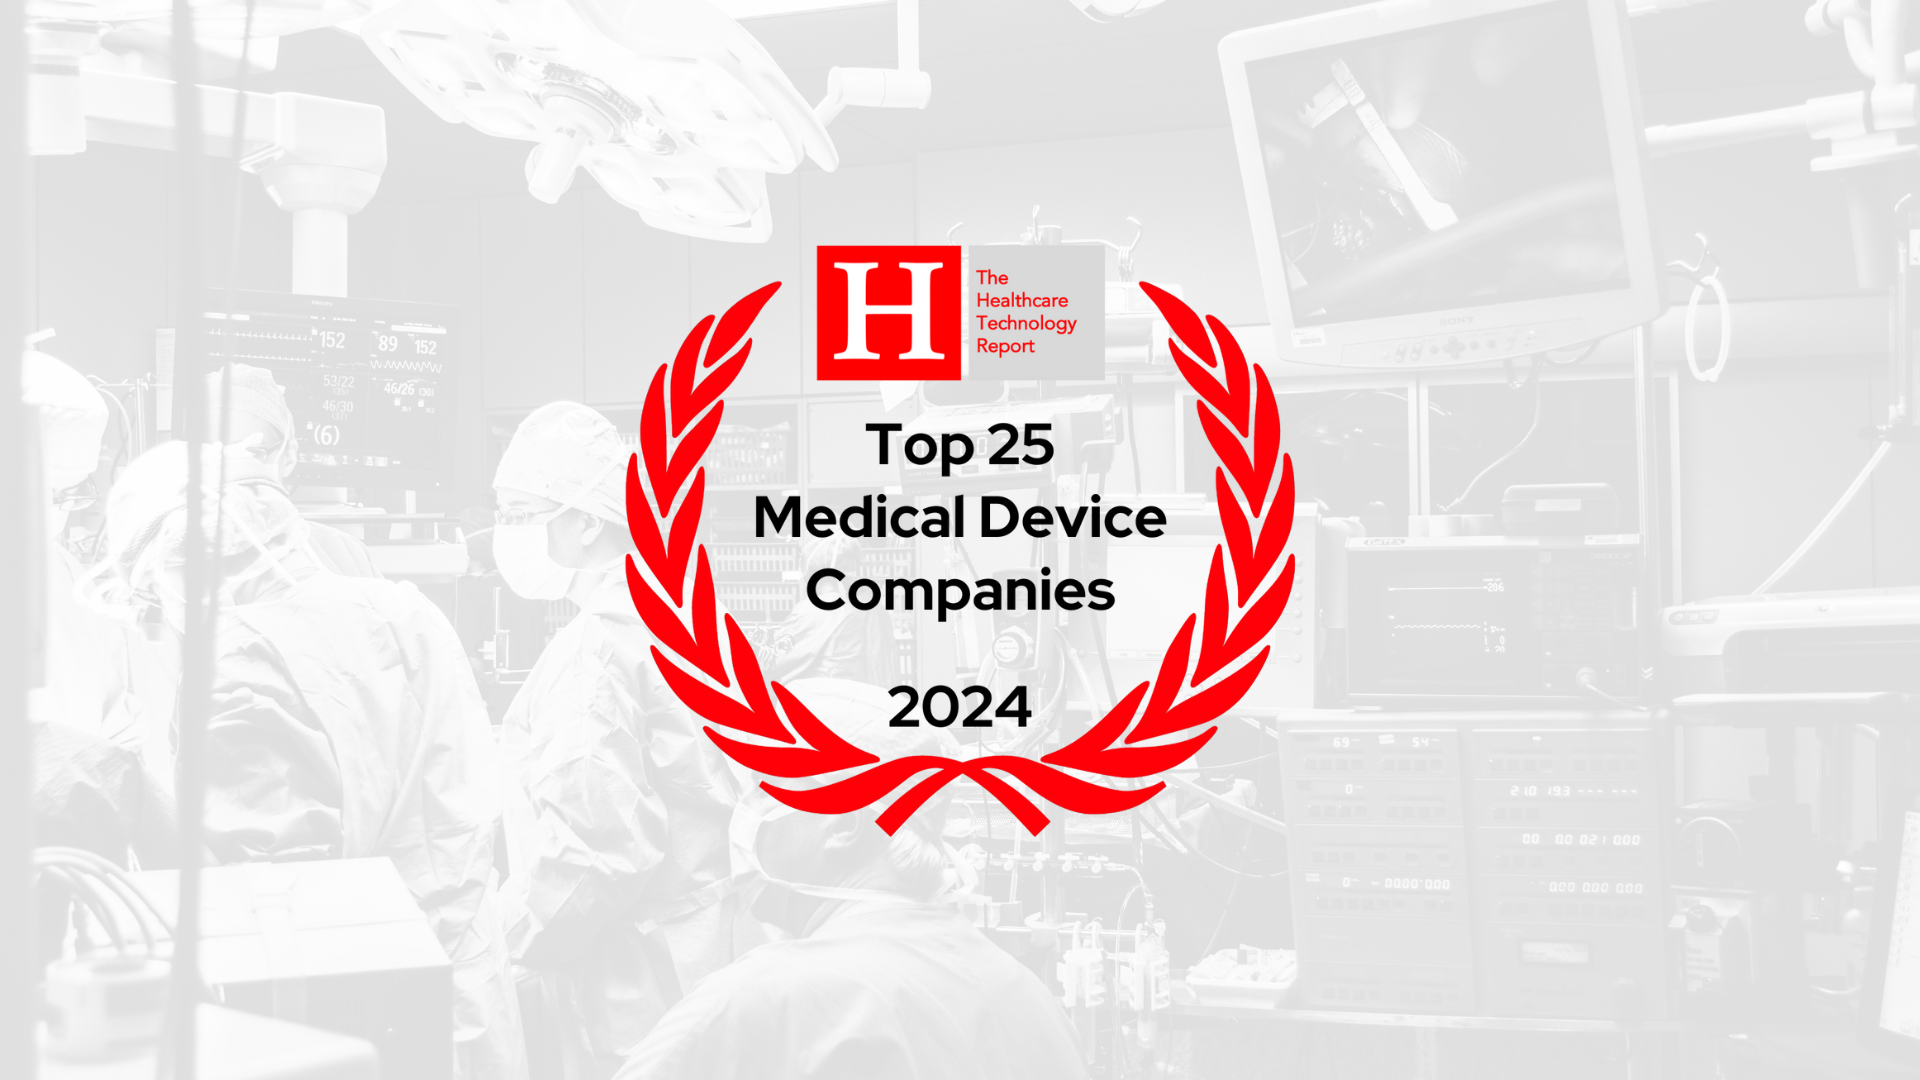 The Top 25 Companies in Medical Device for 2024